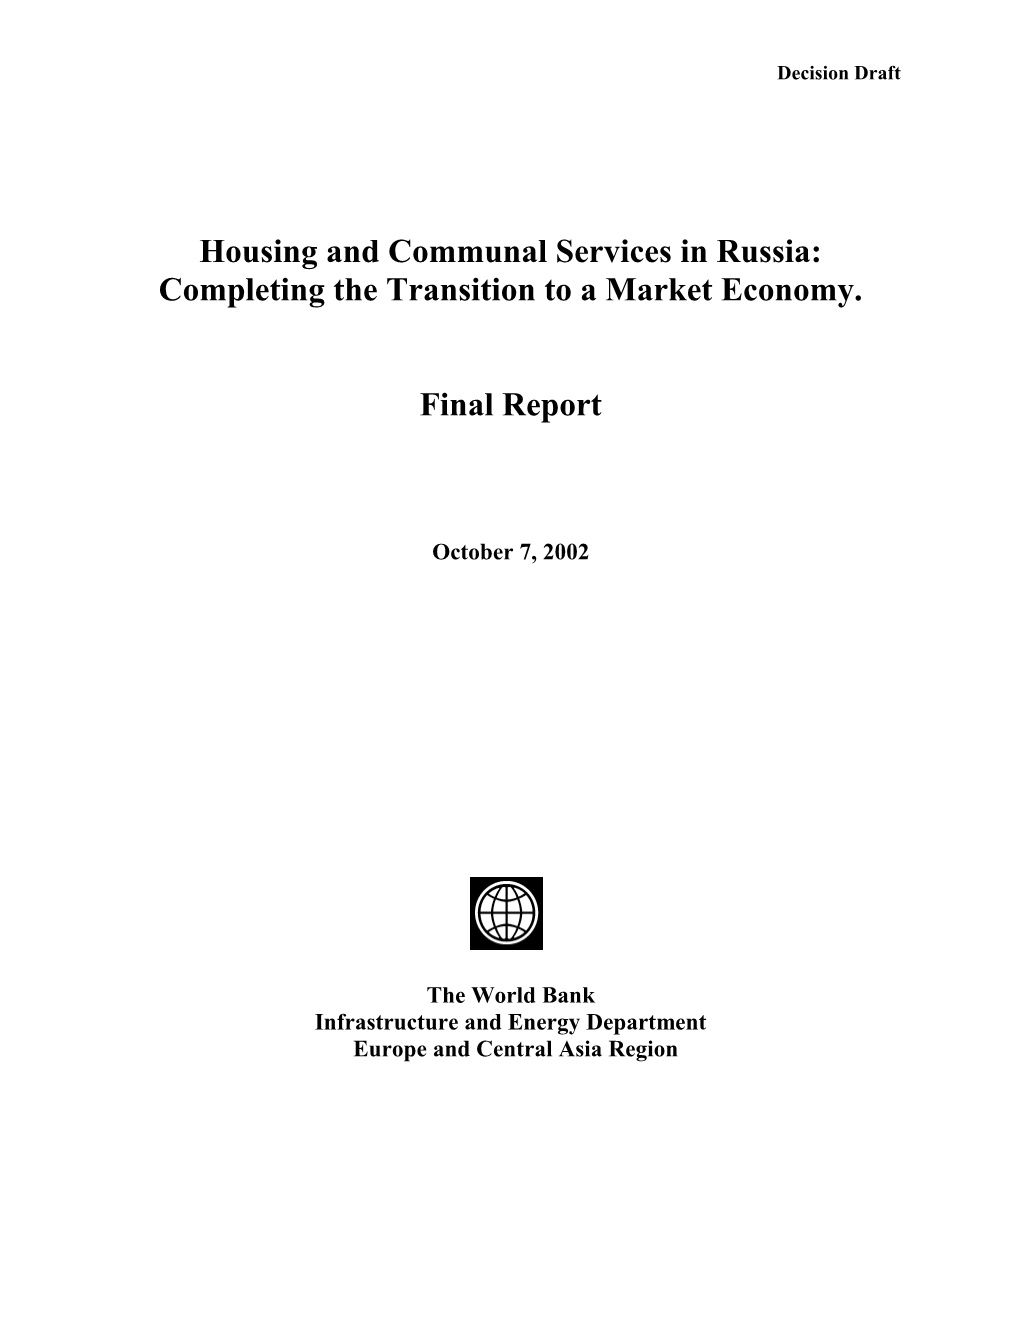 Housing and Communal Services in Russia